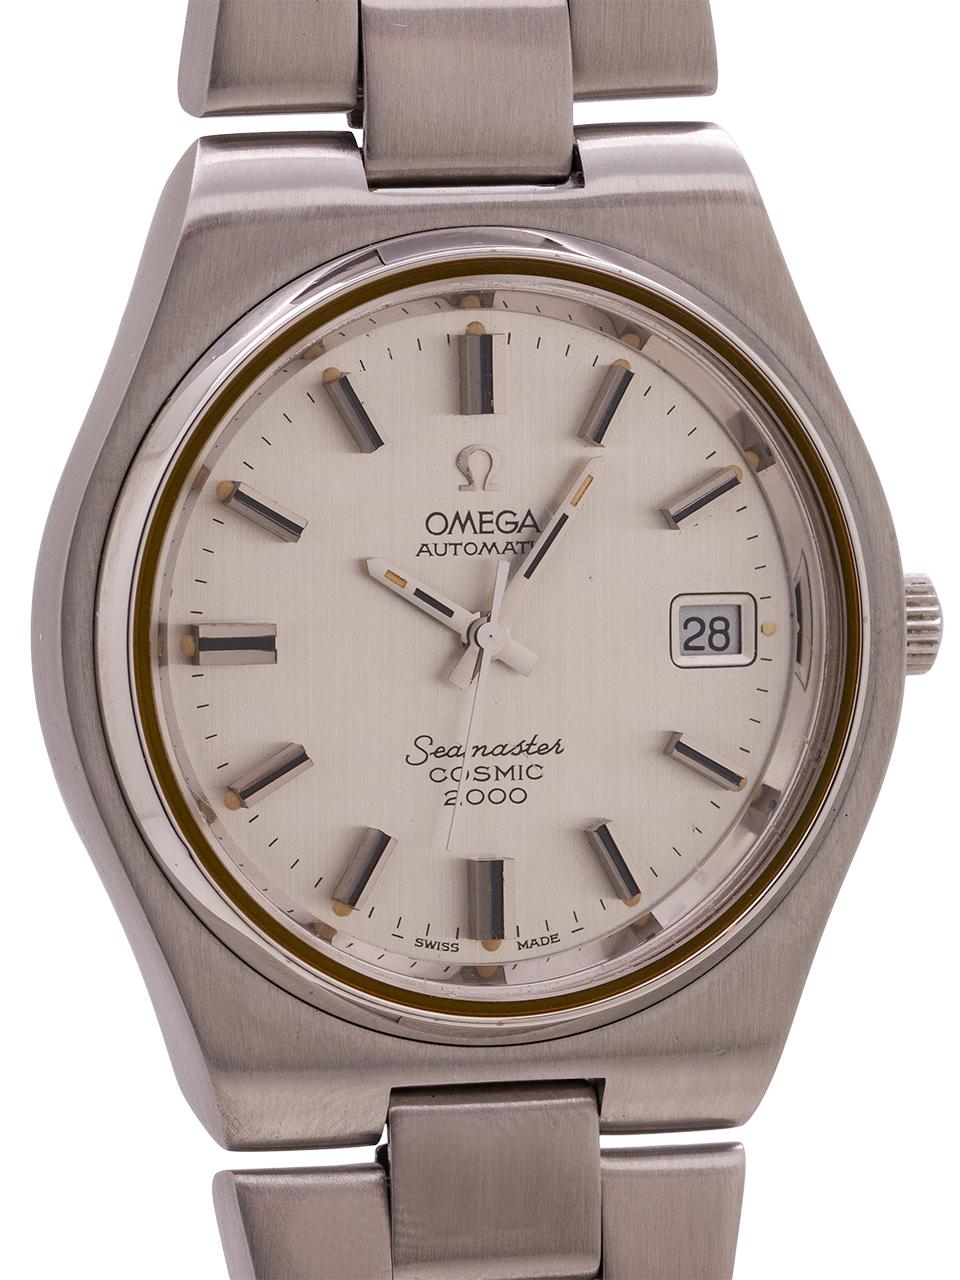 
Omega Seamaster Cosmic 2000, Ref. 166.135. Serial # 33 Million, circa 1971. Featuring a flat and wide modernist case, measuring 38 x 44mm, with mineral glass crystal, signed Omega crown and case back Hippocampus logo. With lovely original silver